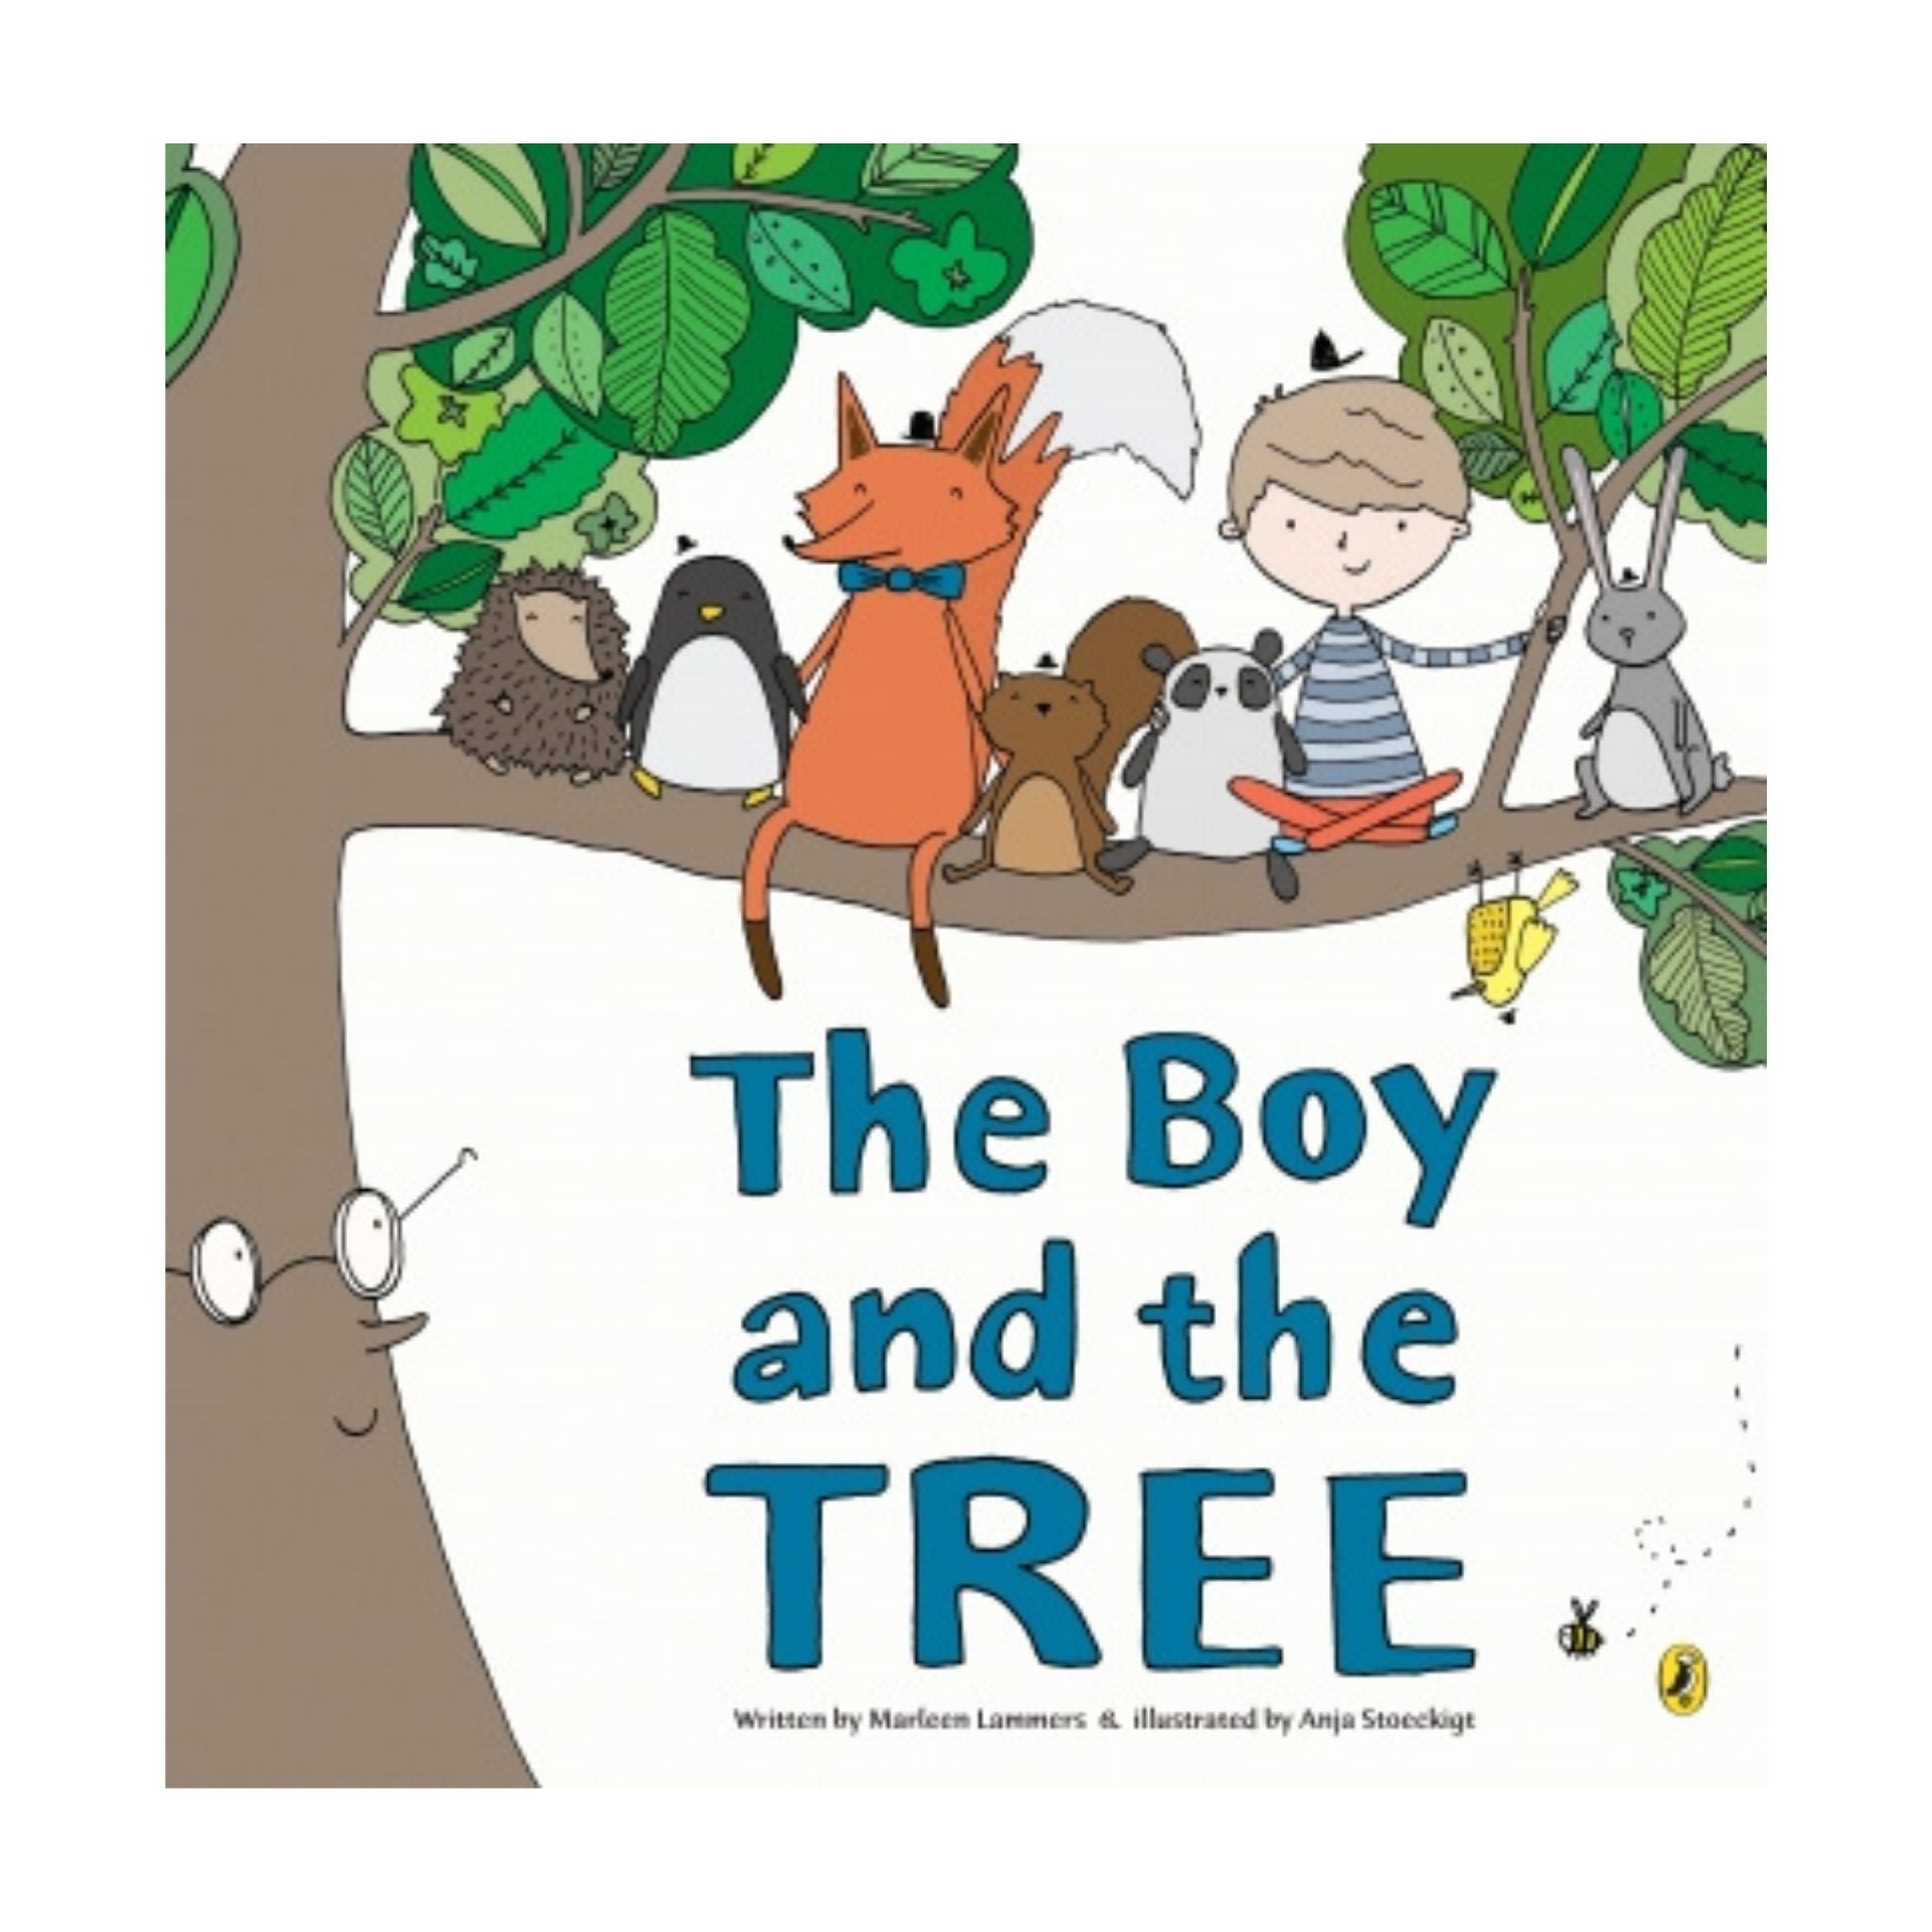 The Boy and the Tree